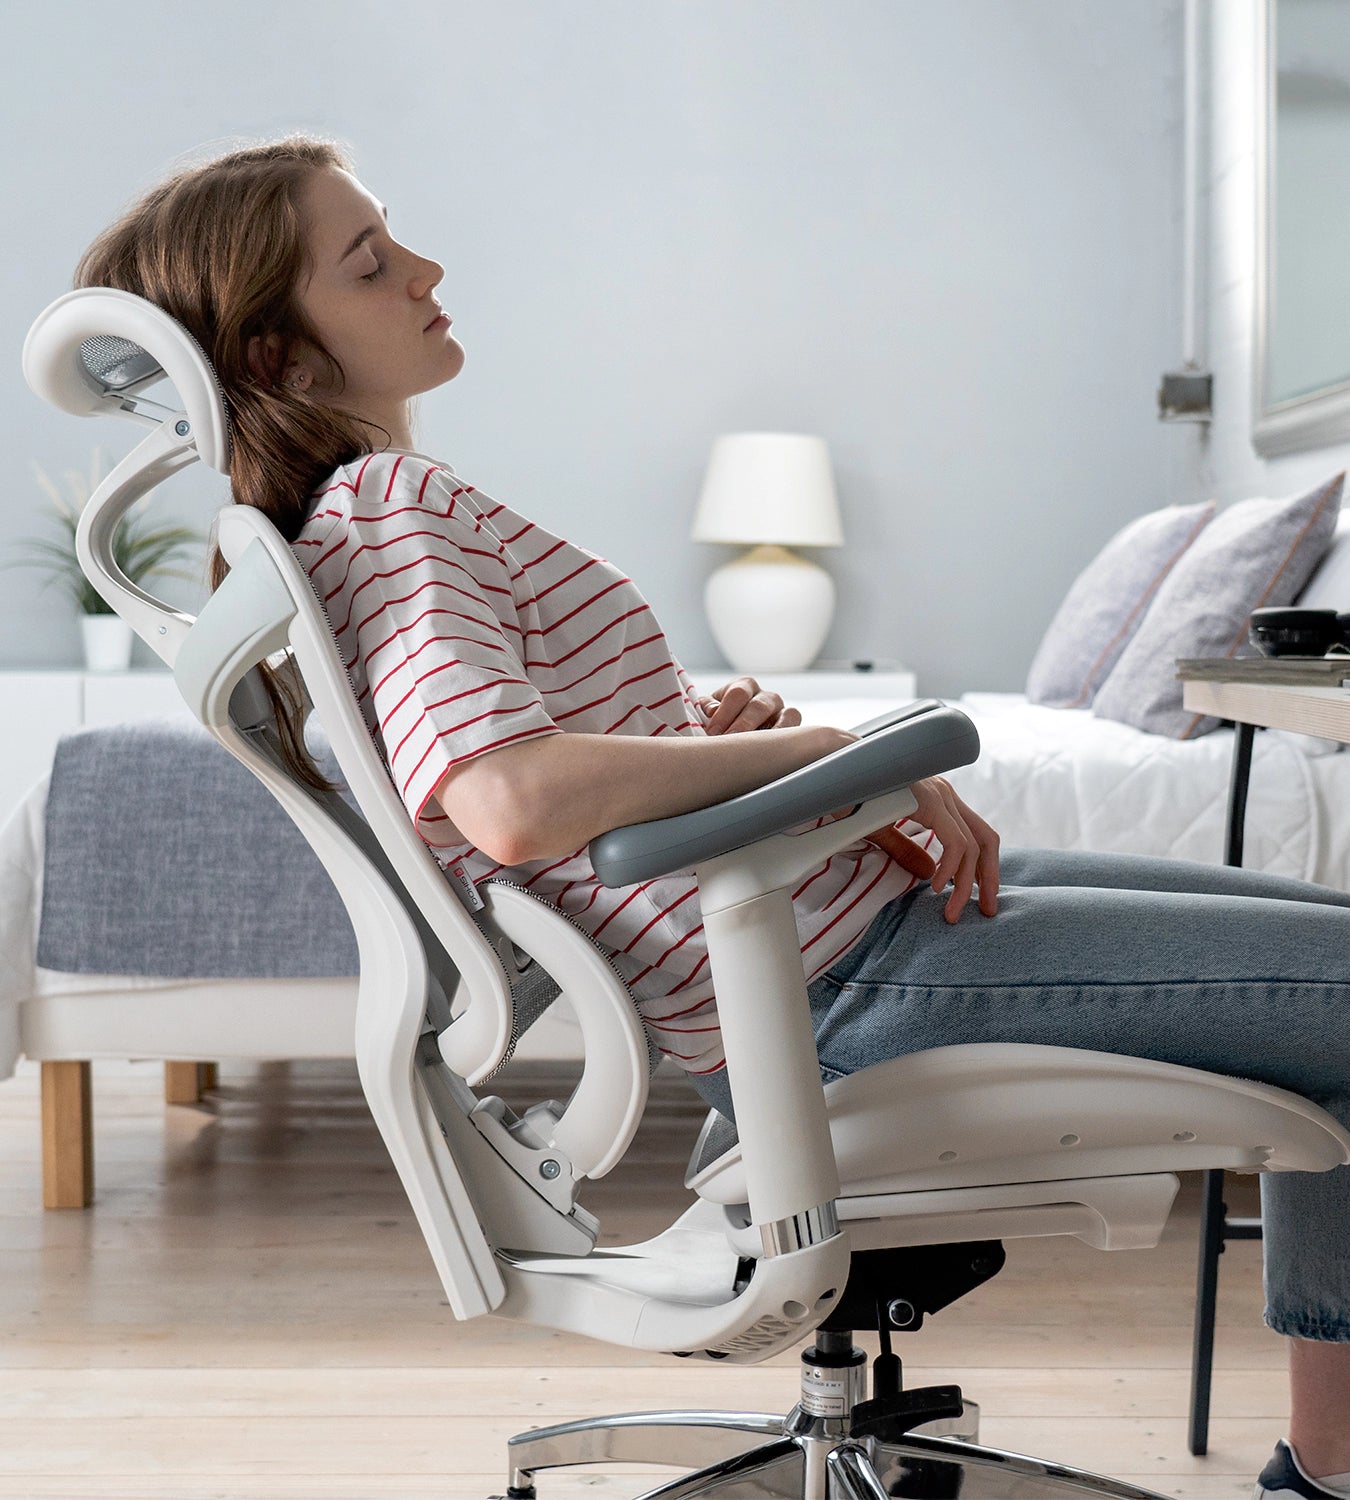 sihoo doro c300 Recline in comfort and support